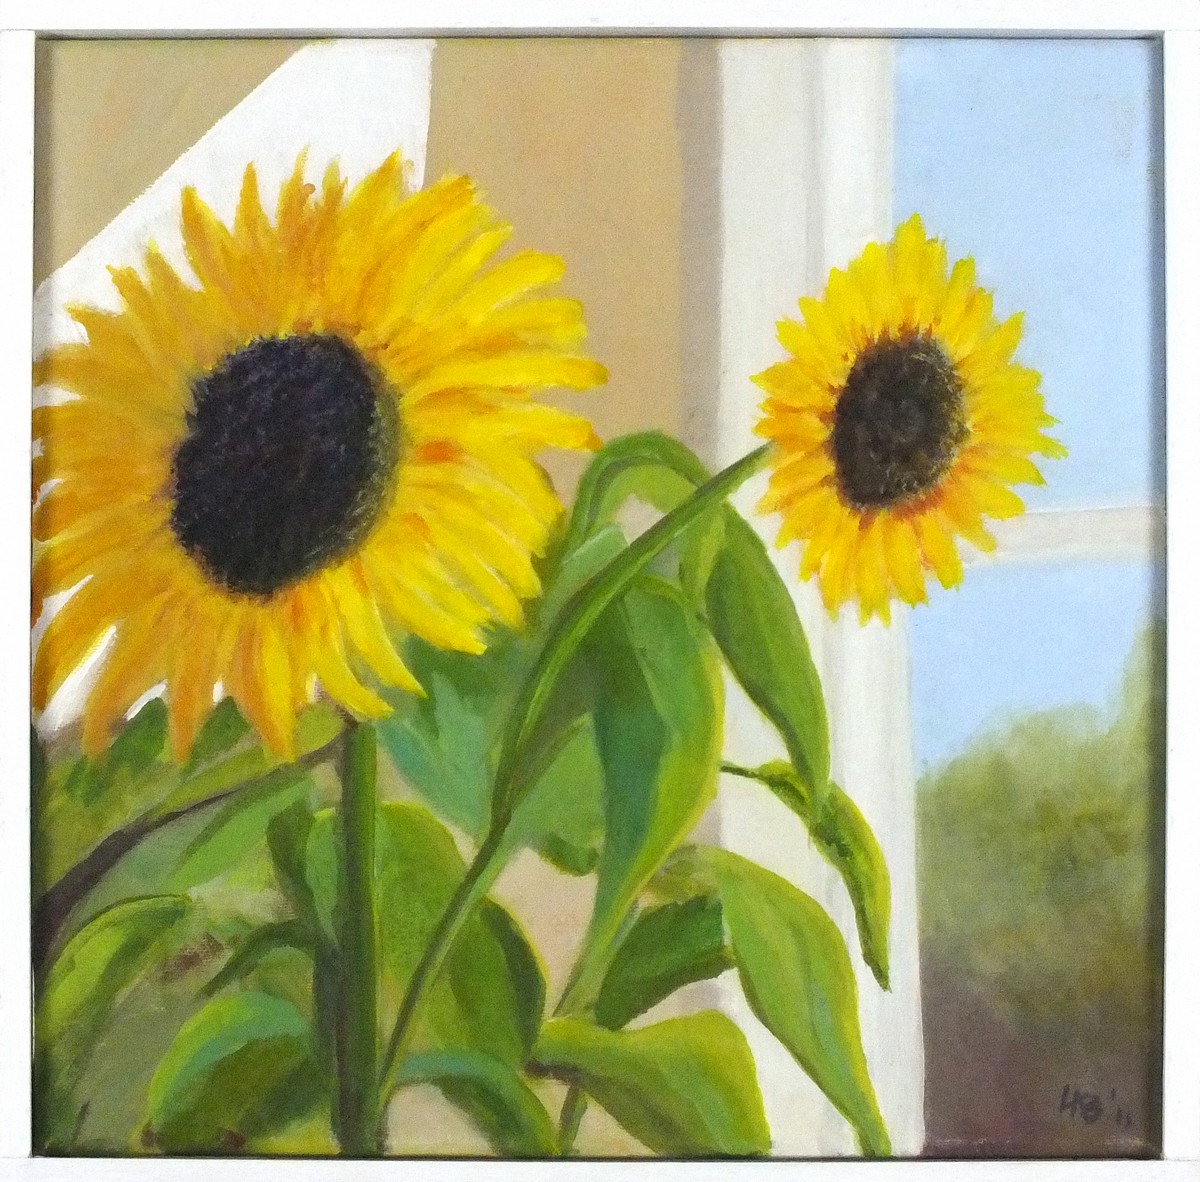 Lesley BICKLEY (British b. 1955) Sunflowers, Sue's Window, Oil on canvas, signed with initials and - Image 2 of 2